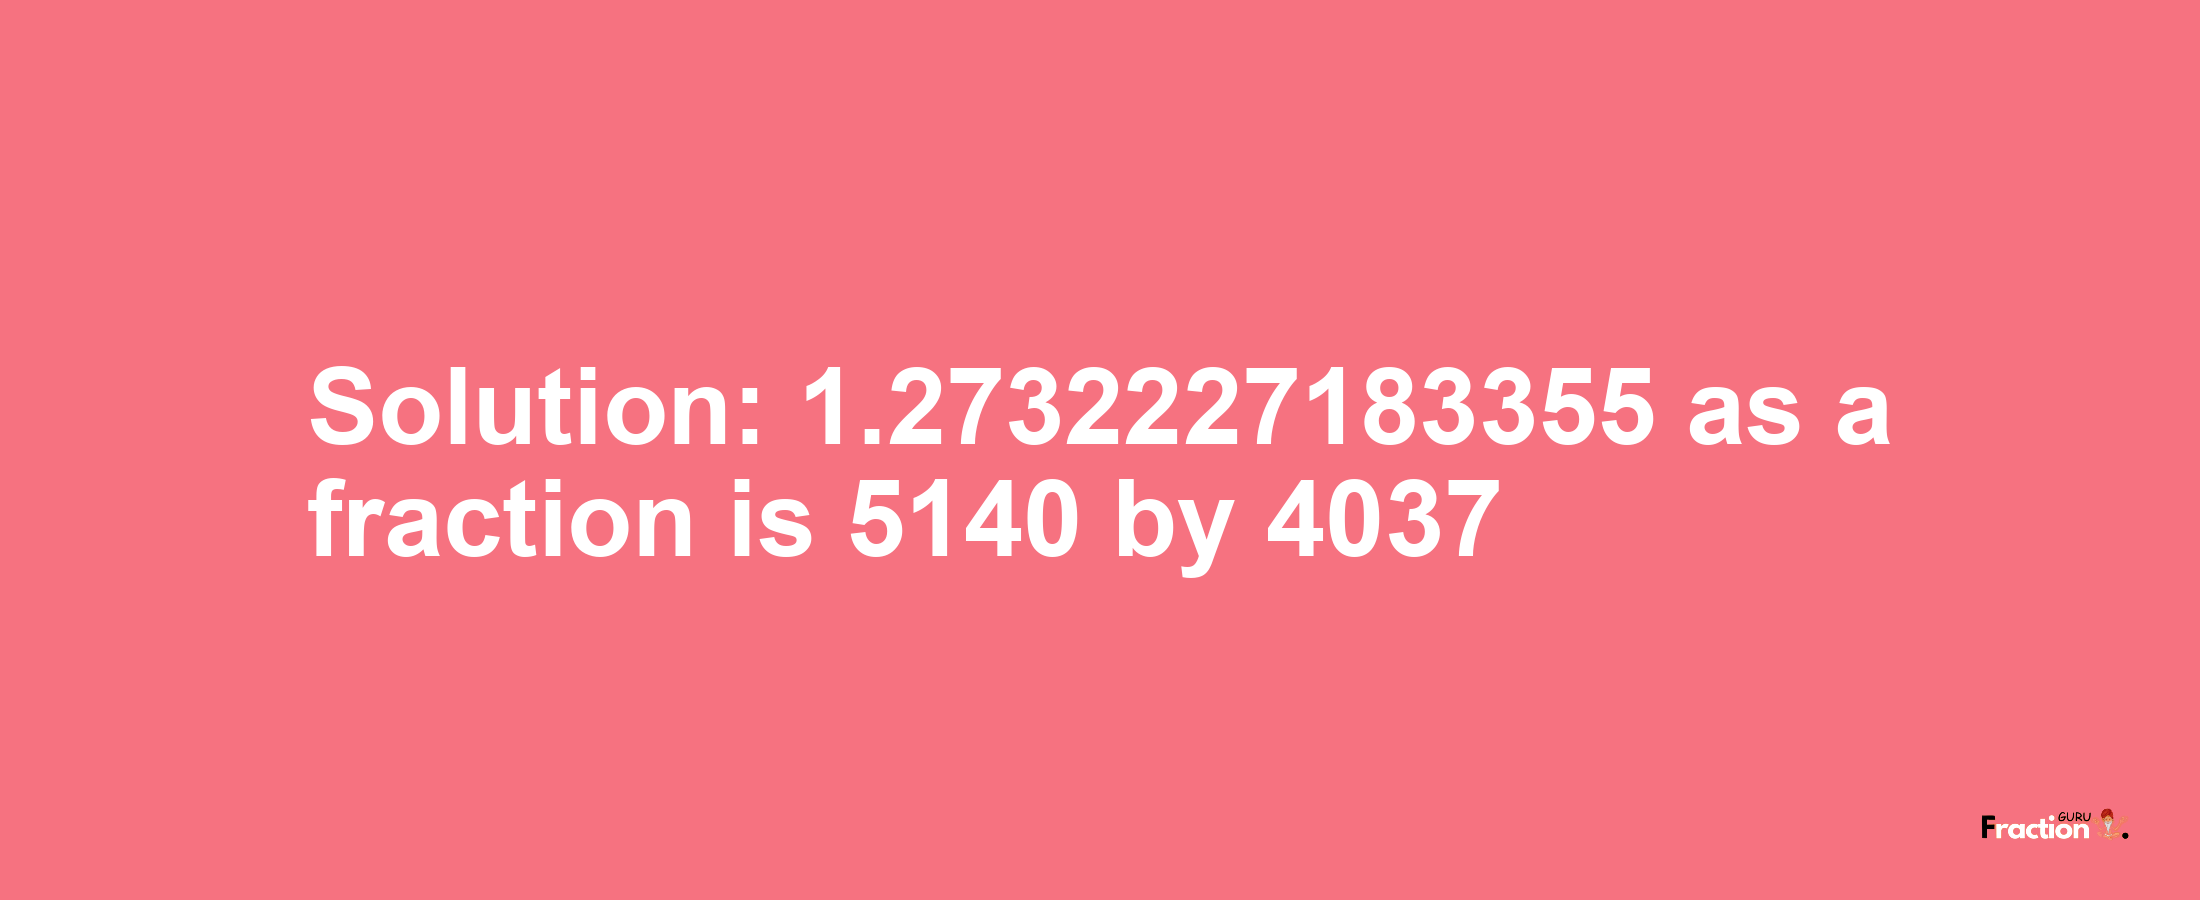 Solution:1.2732227183355 as a fraction is 5140/4037